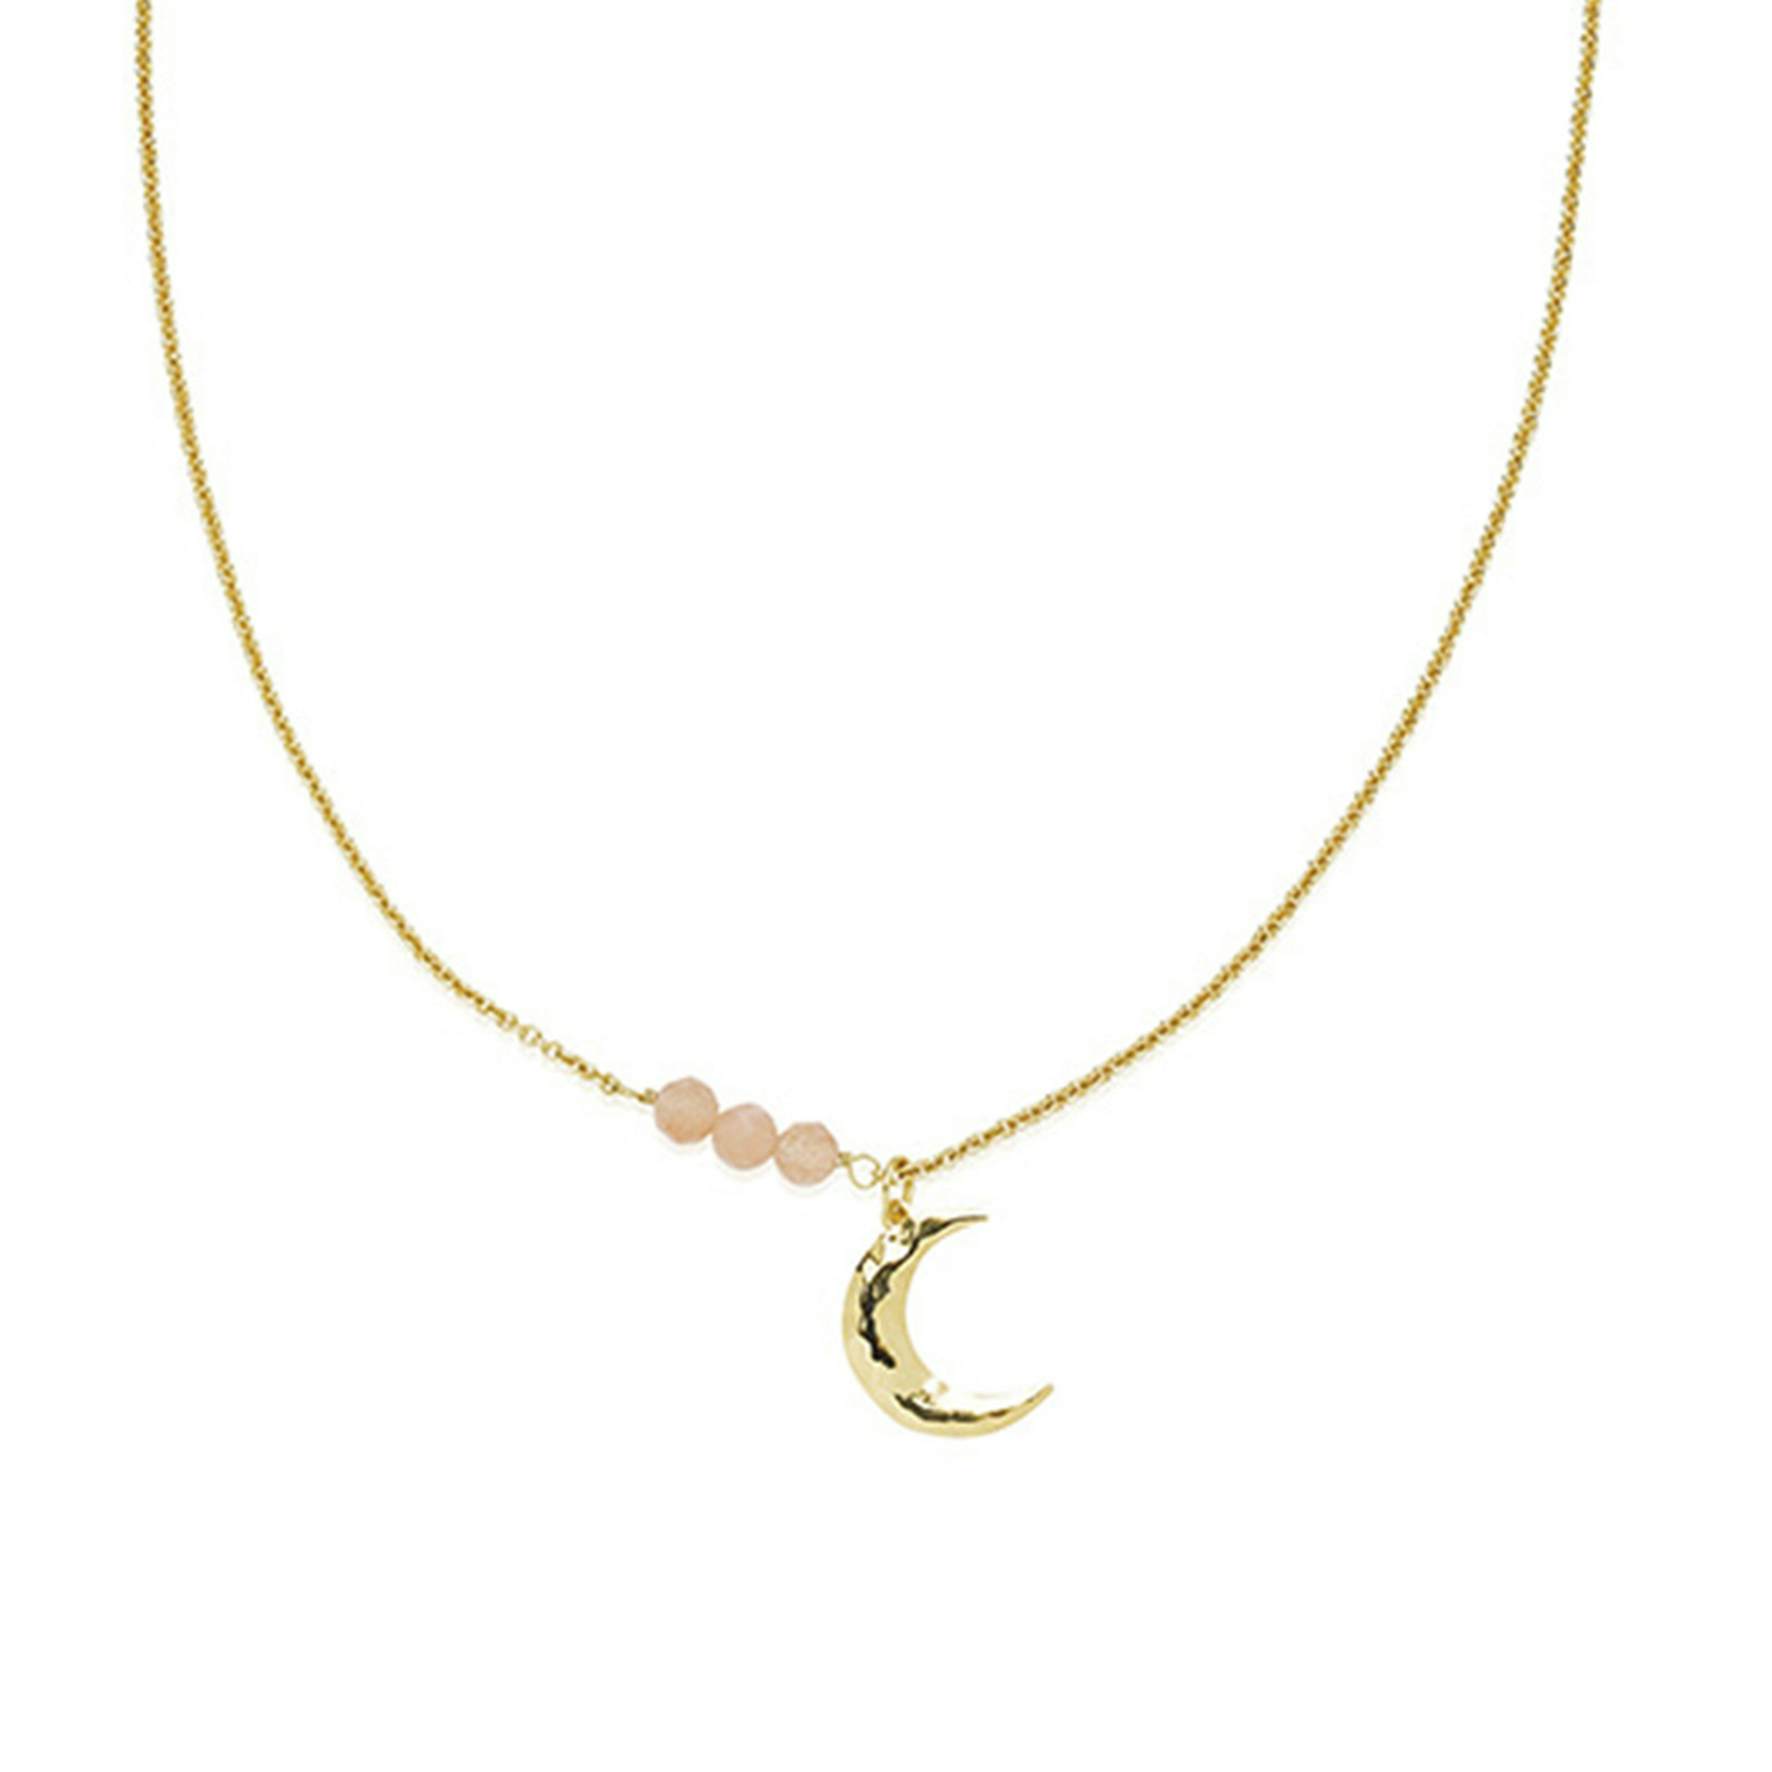 Mie Moltke Necklace With Moon And Pearls